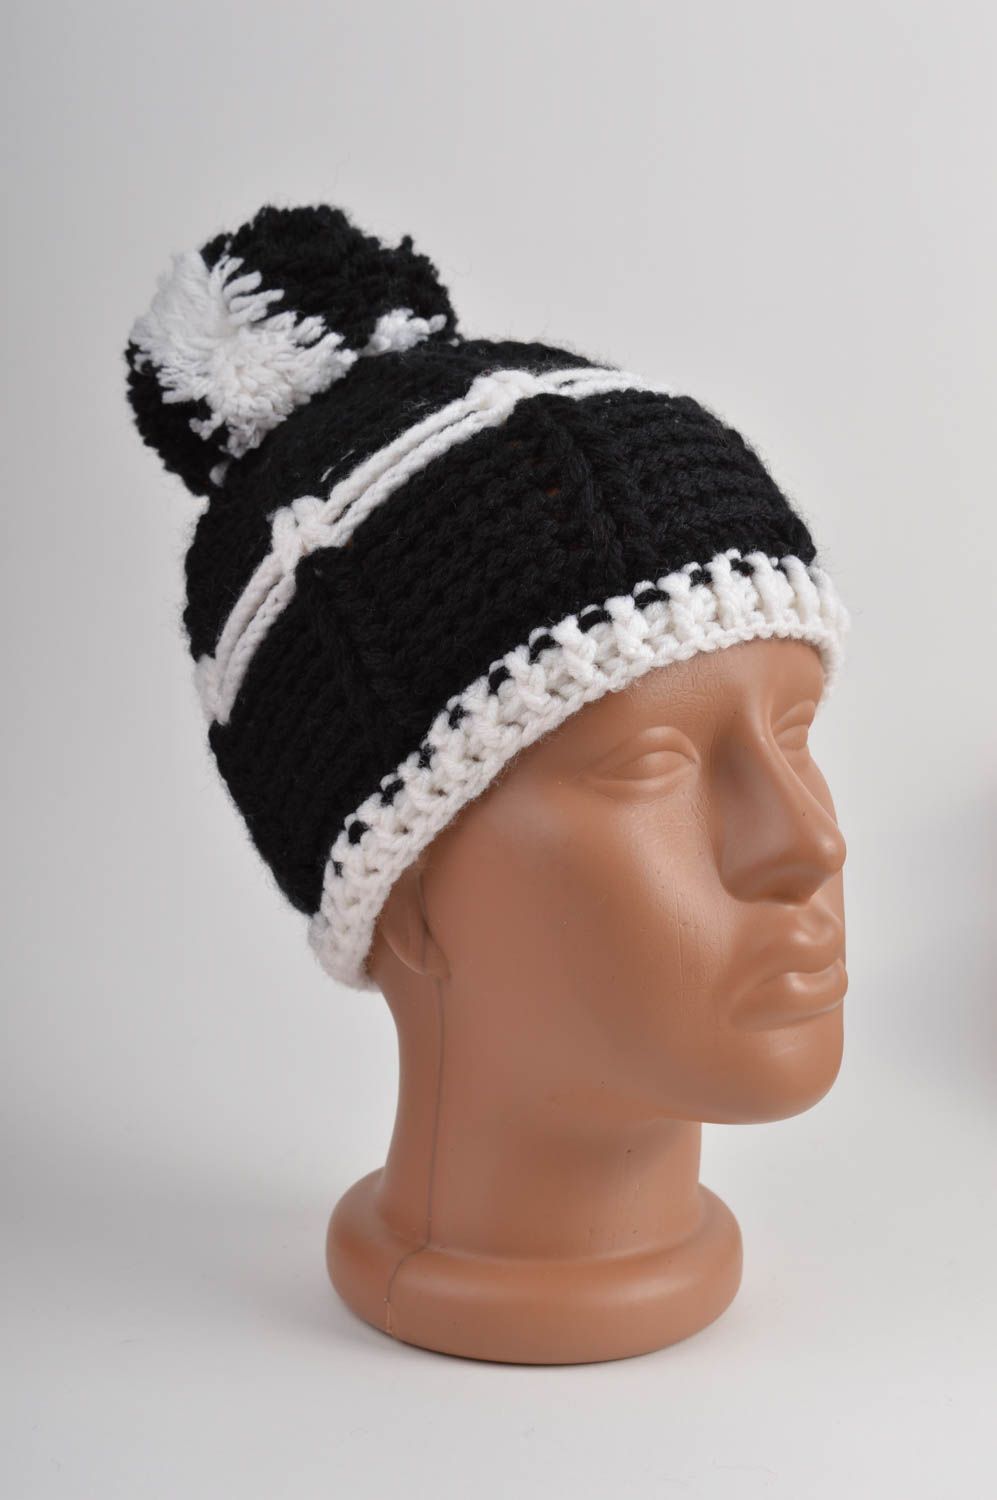 Woolen warm caps black and white hat for kids crocheted children accessory photo 2